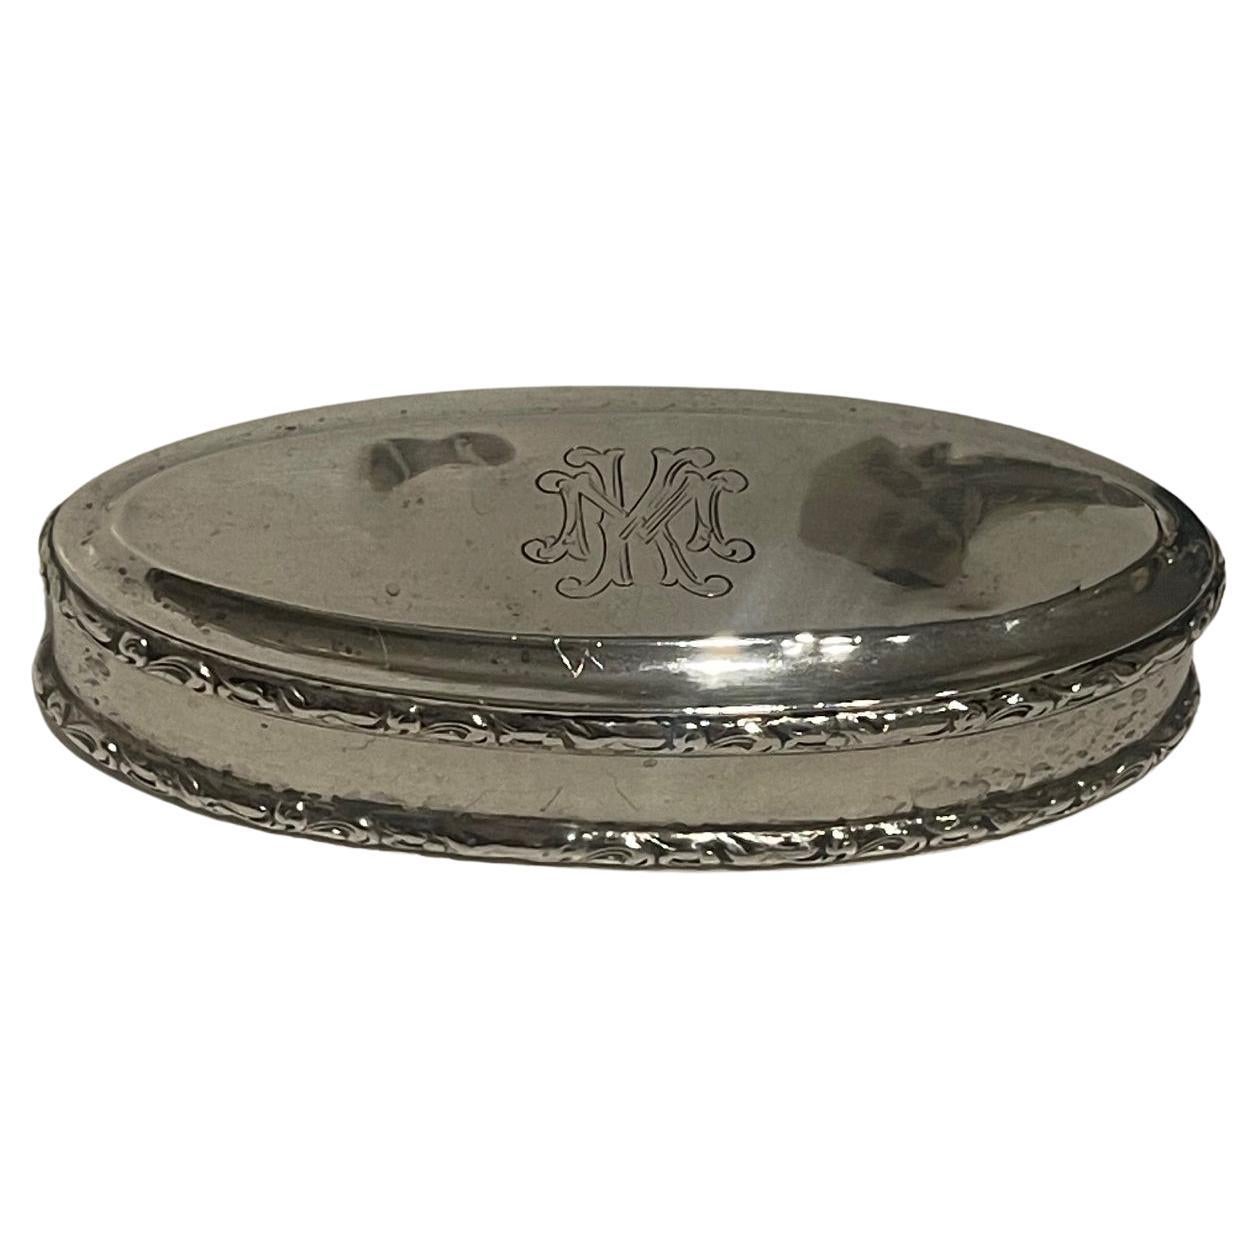 Sterling Silver Victorian Pill Box with Decorative Trim, Circa Early 1900s